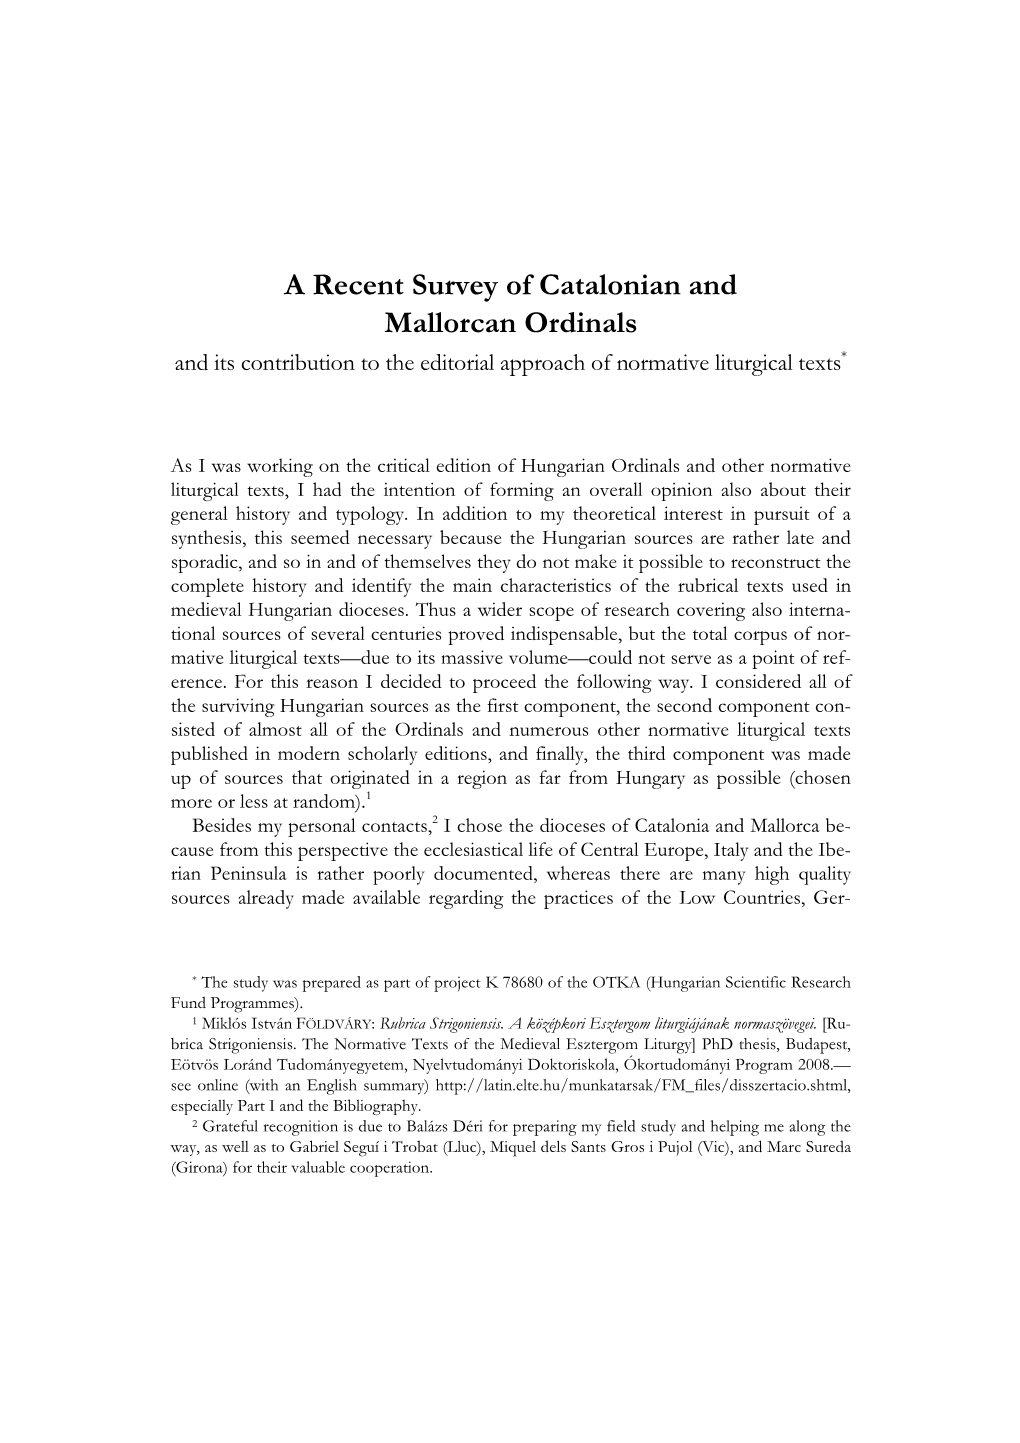 A Recent Survey of Catalonian and Mallorcan Ordinals and Its Contribution to the Editorial Approach of Normative Liturgical Texts *